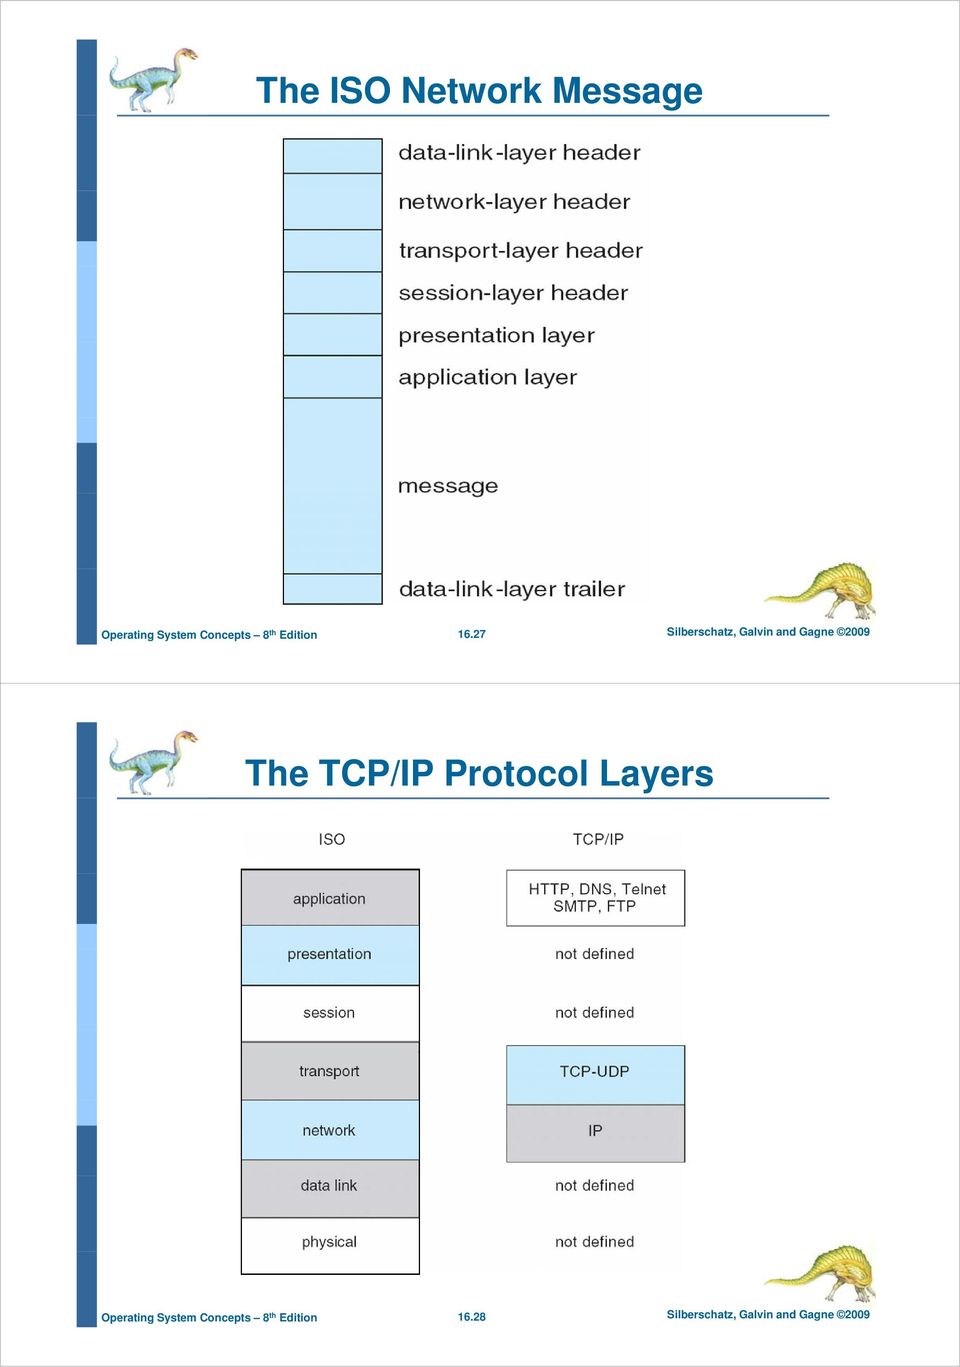 2009 The TCP/IP Protocol Layers